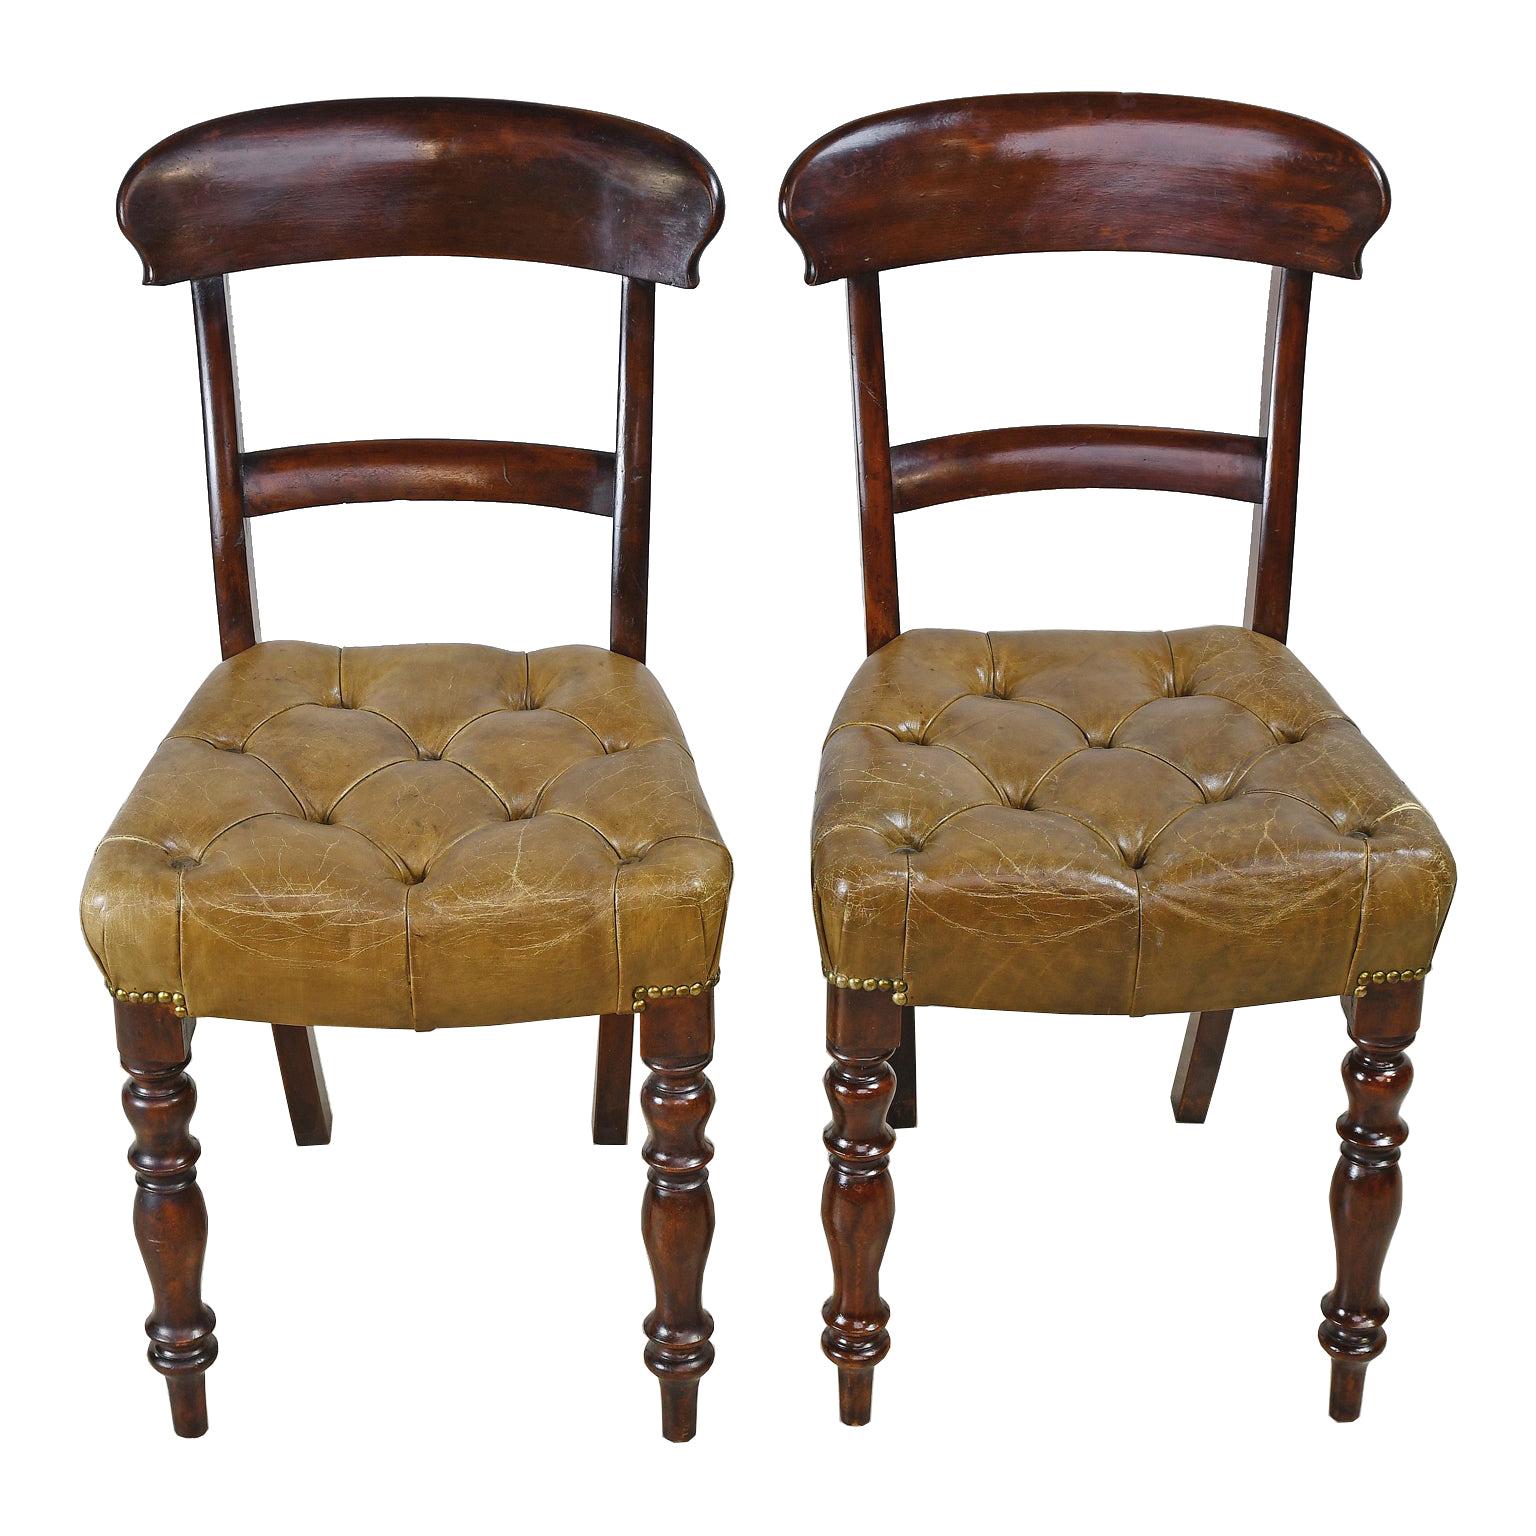 Pair of Early Victorian Mahogany Chairs with Leather Upholstery, England